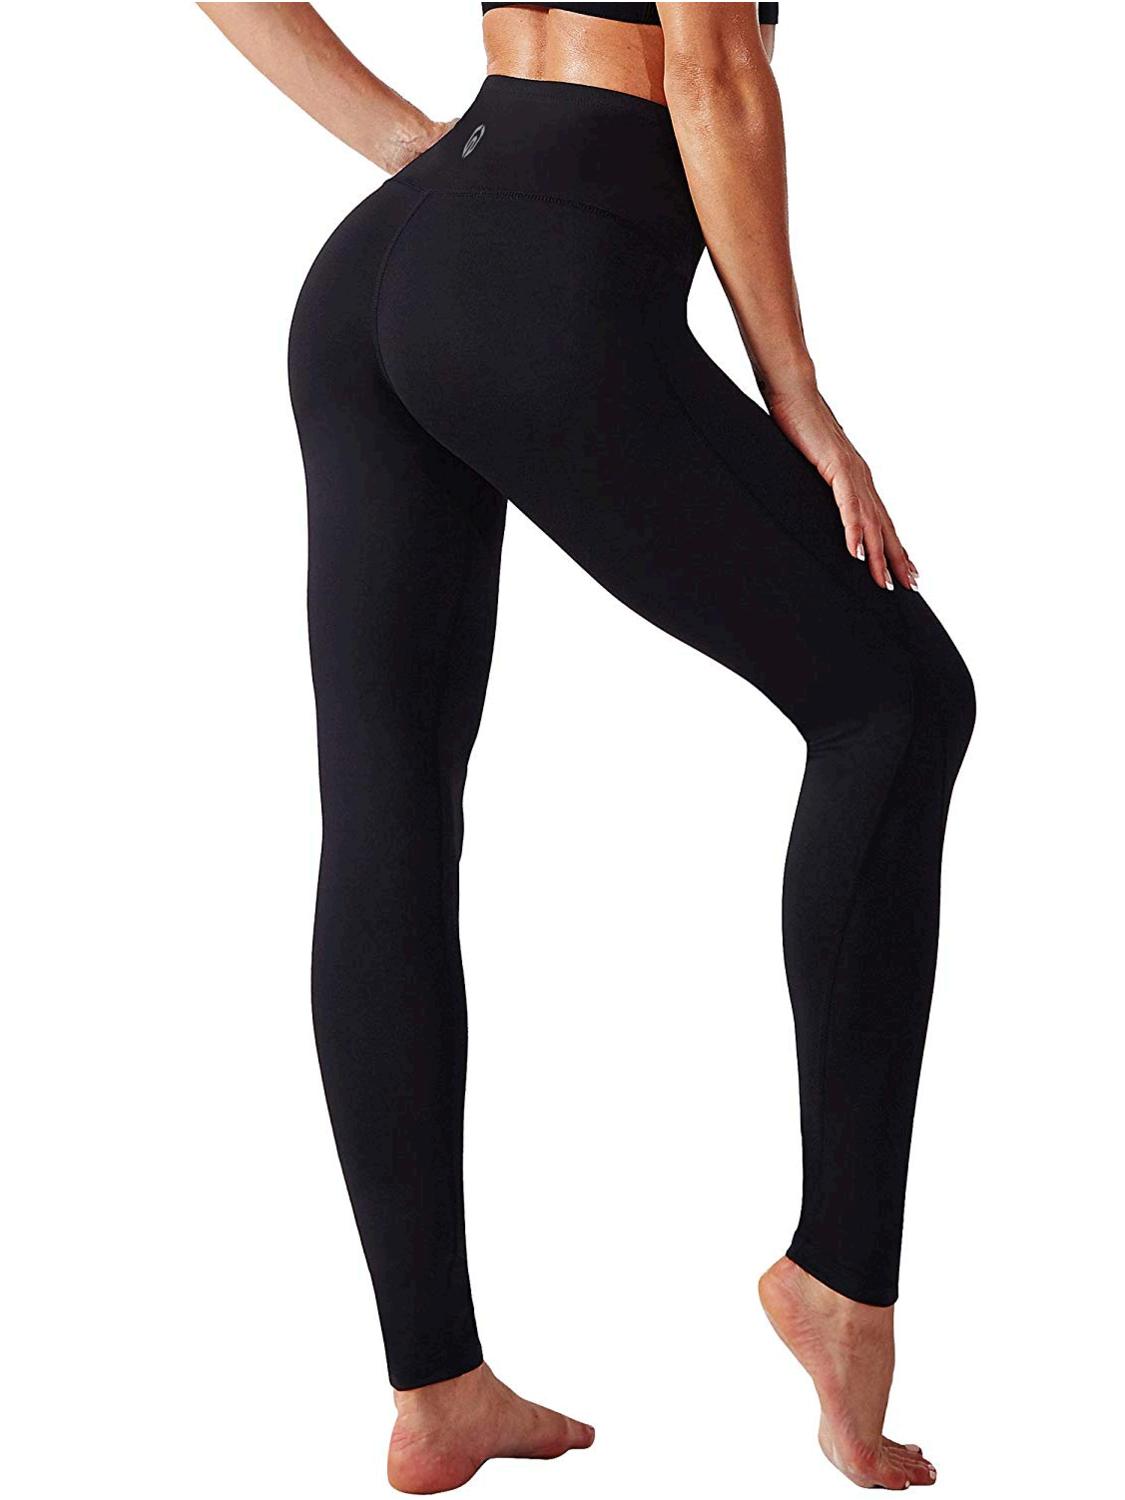 UUE 25Inseam Black Leggings with Pockets for women, Tummy control and High  waisted leggings